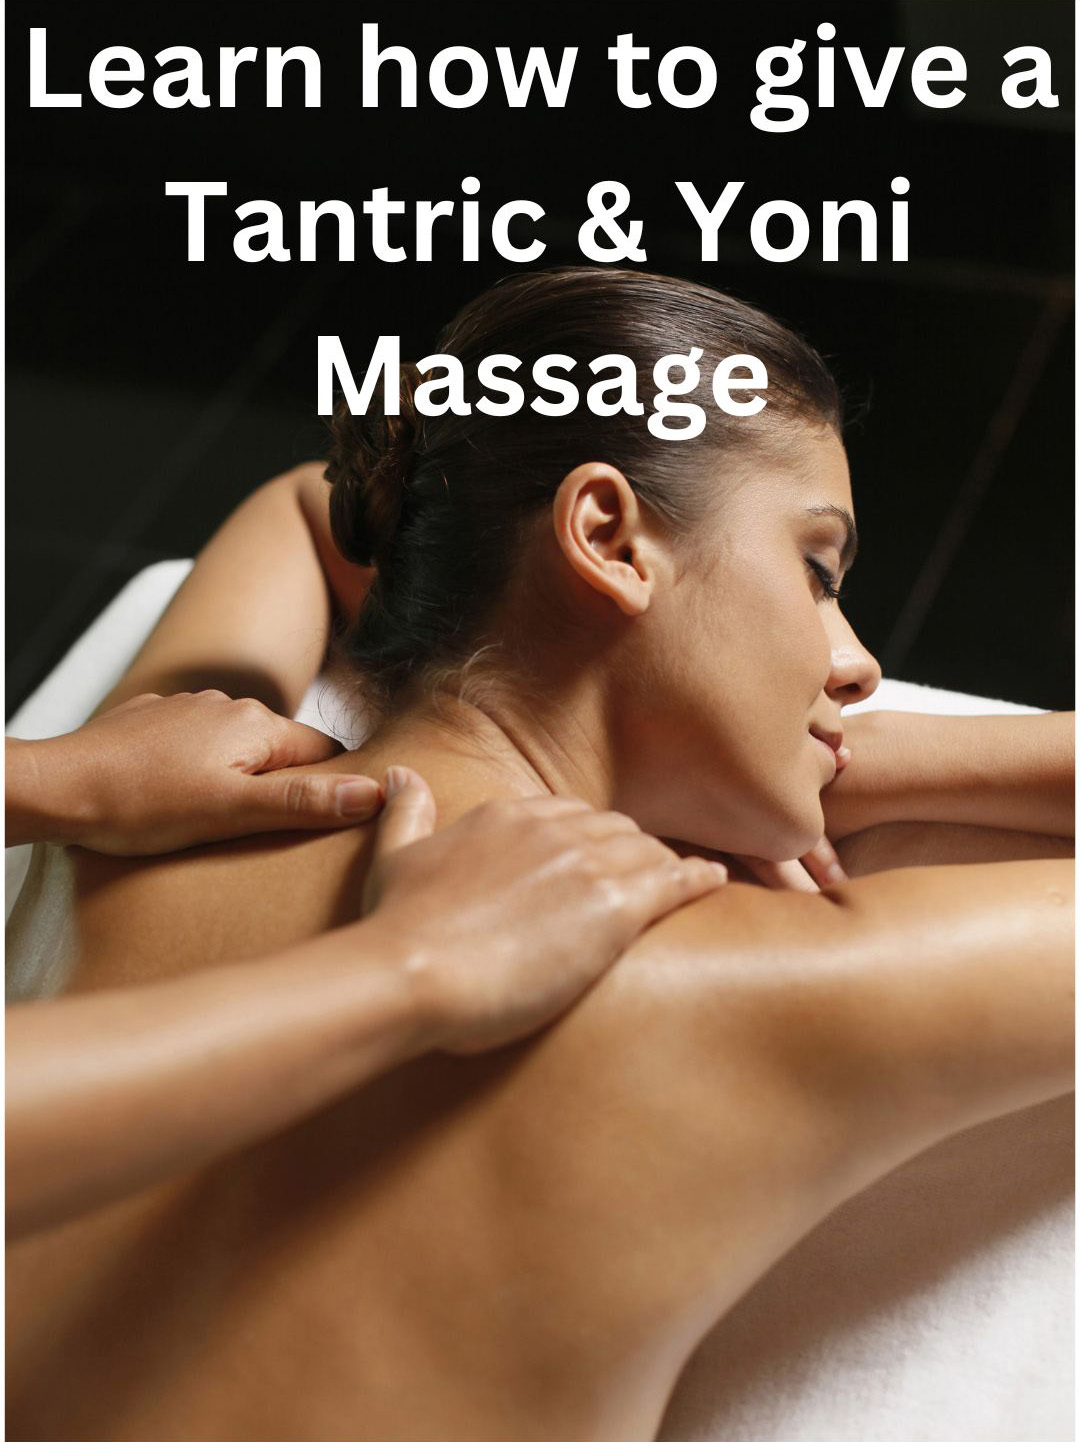 Learn tantric massage